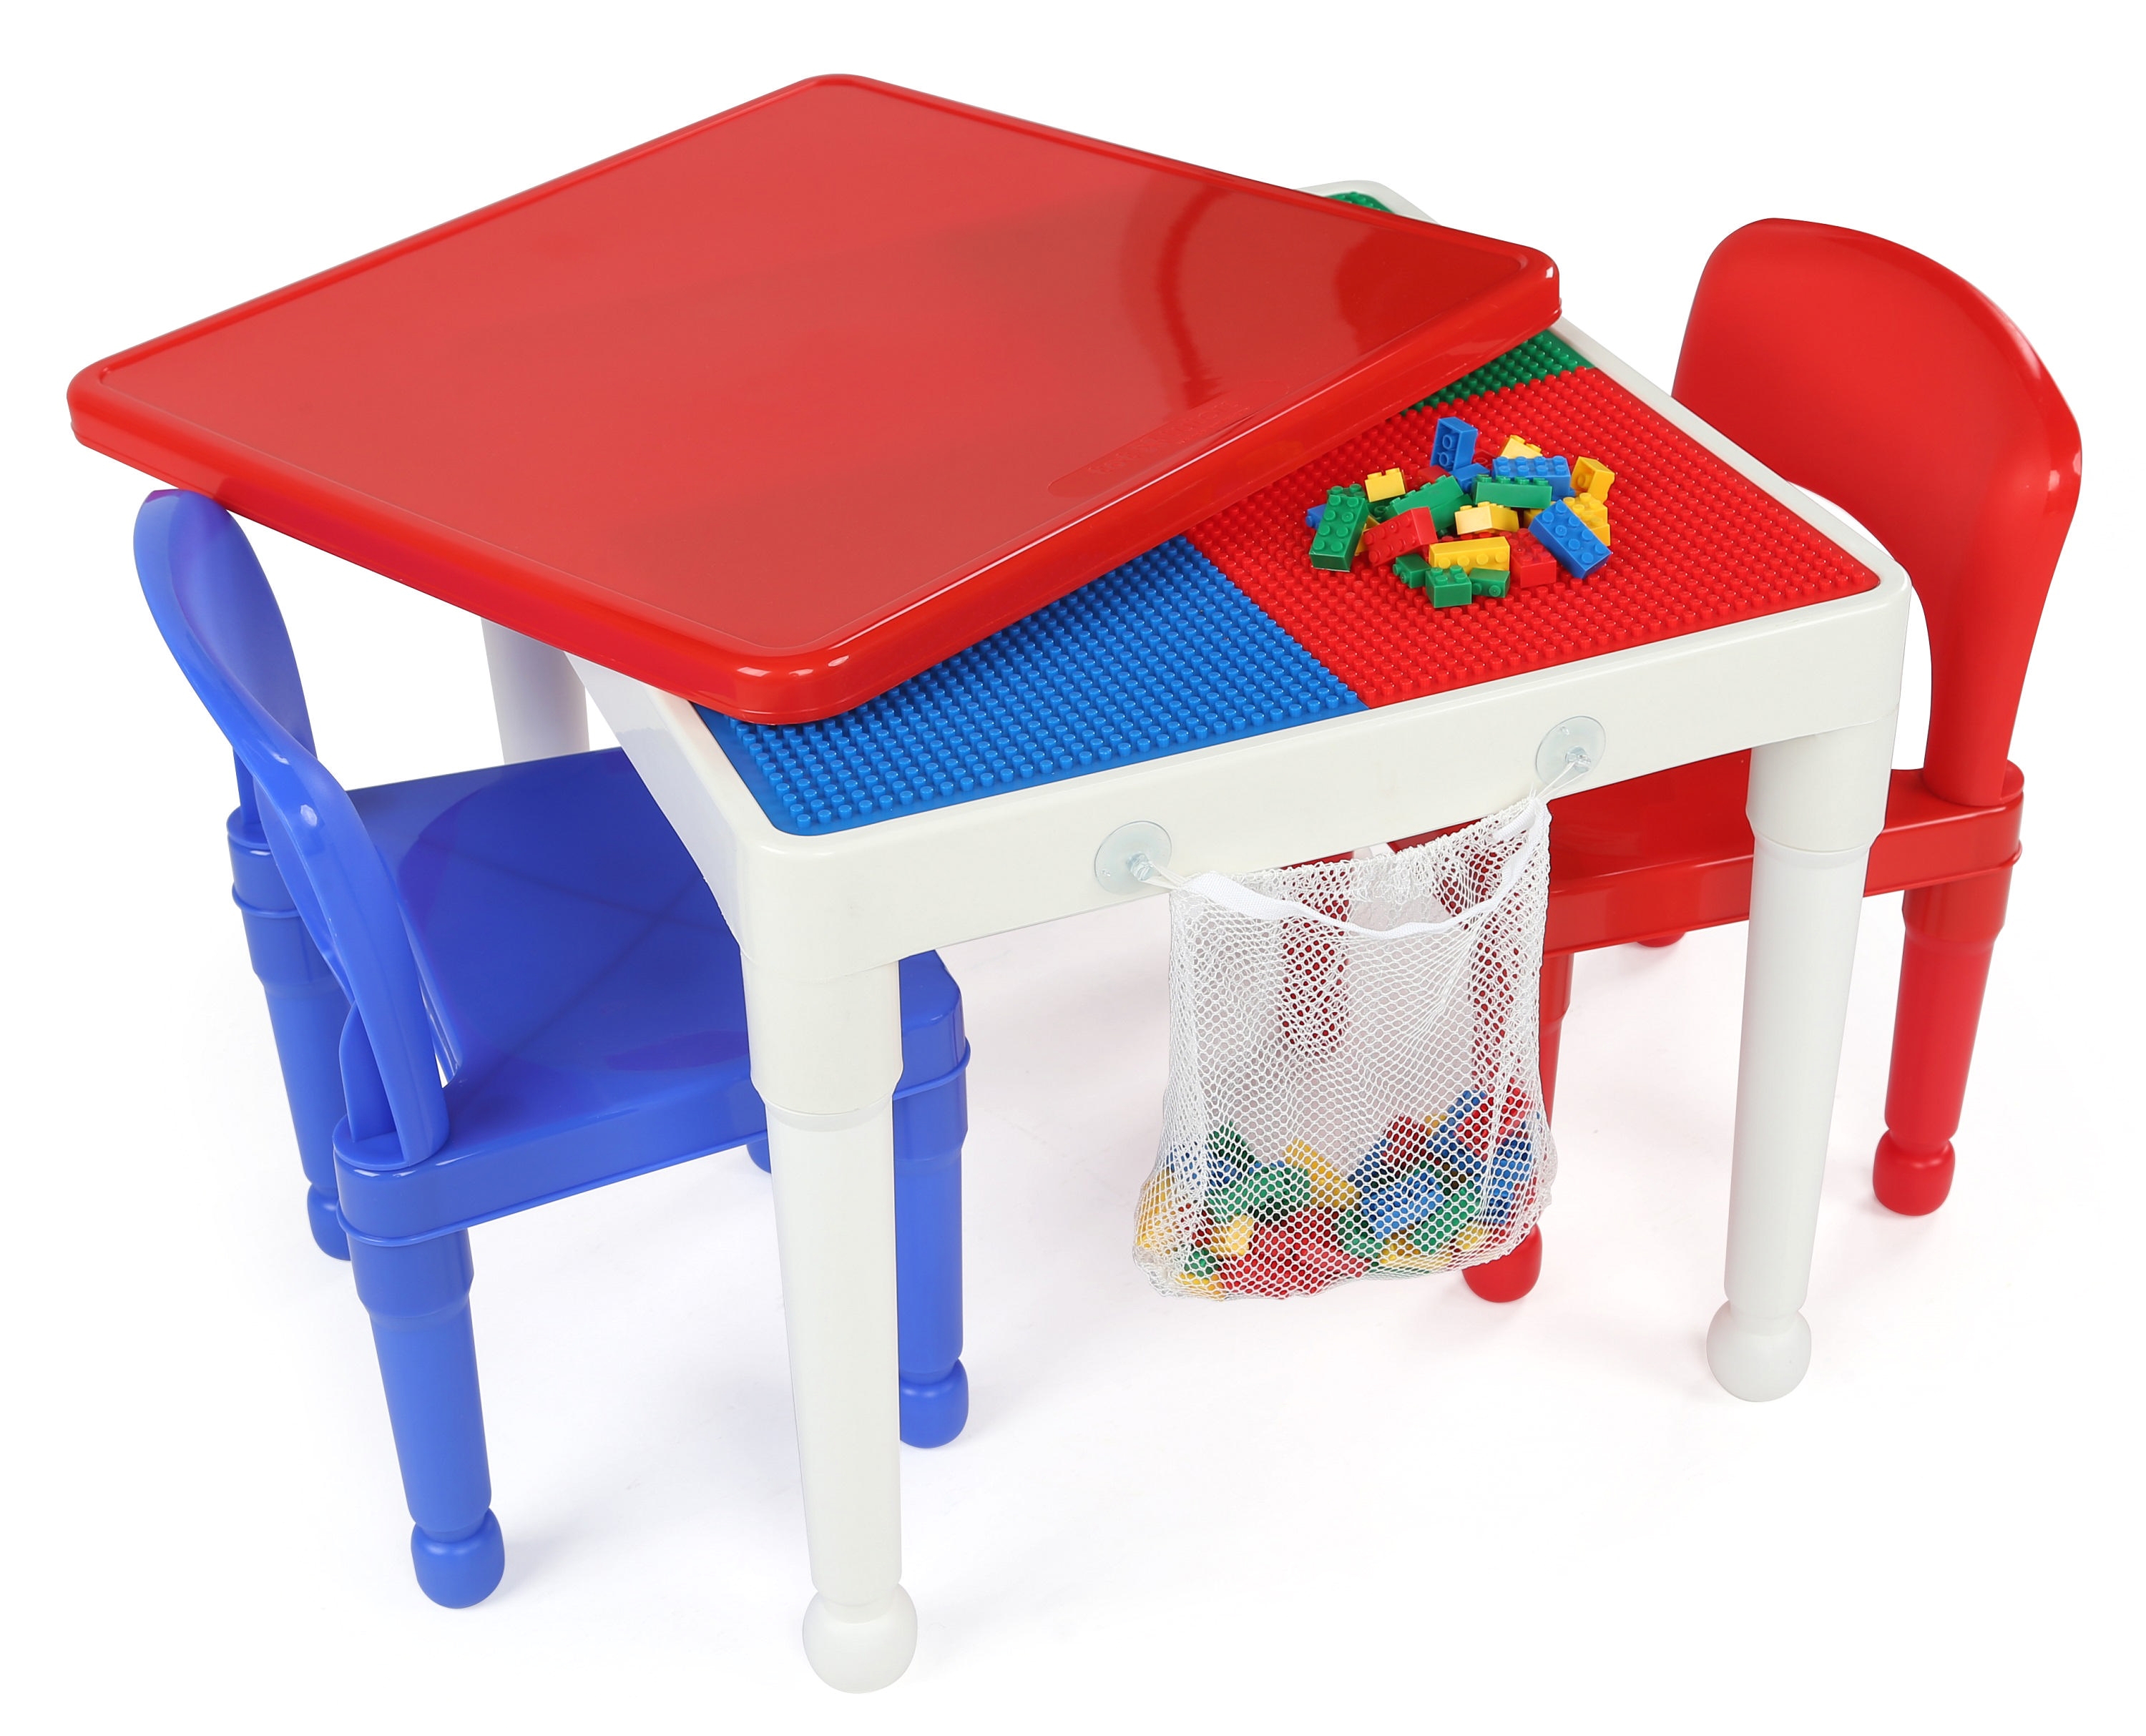 Toys R Us Childrens Table And Chair Sets Toywalls